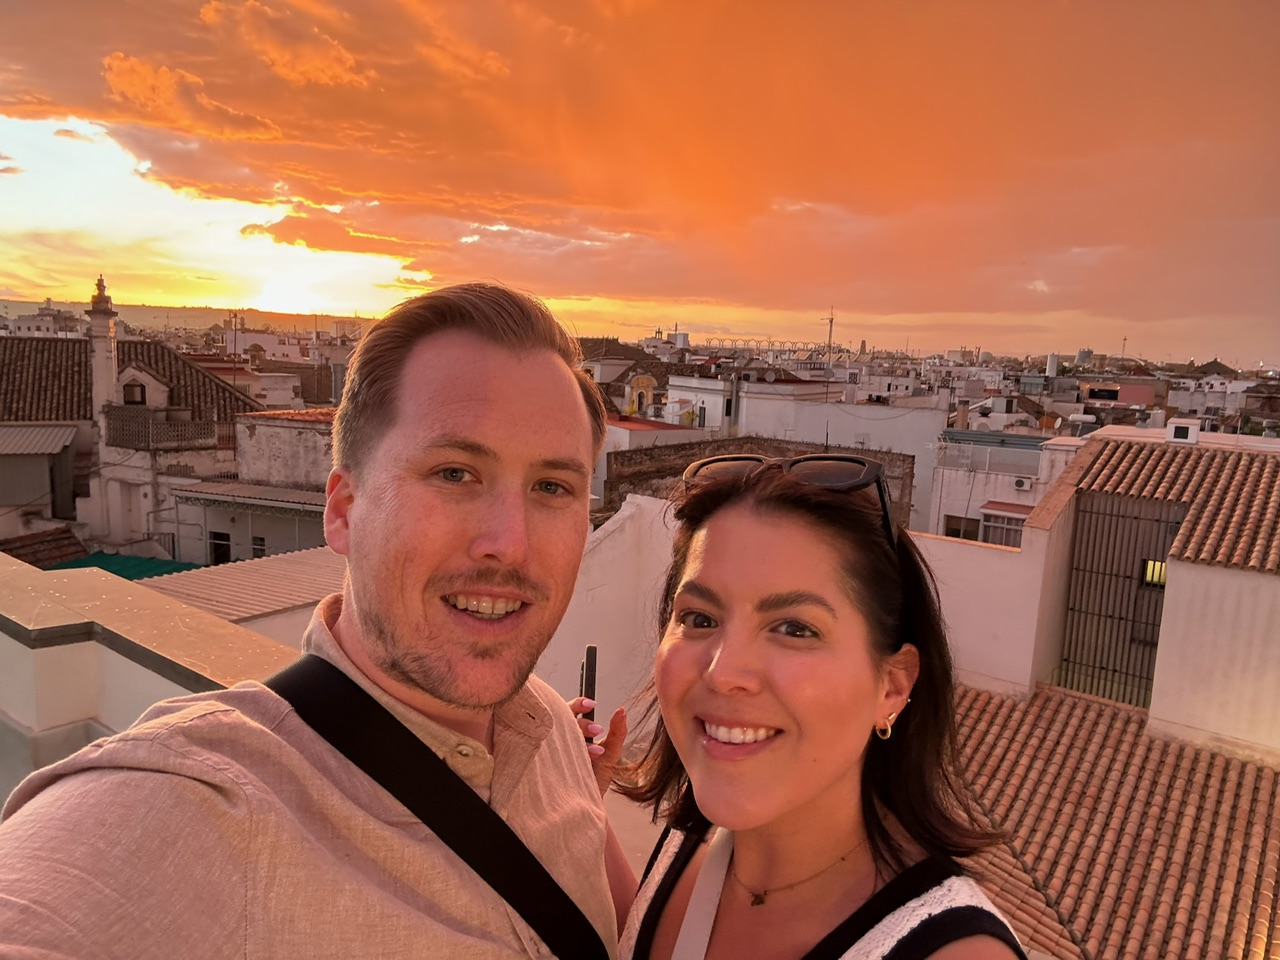 Jizell and Kelly have been married for two years and only in April took their honeymoon to Seville, Spain.